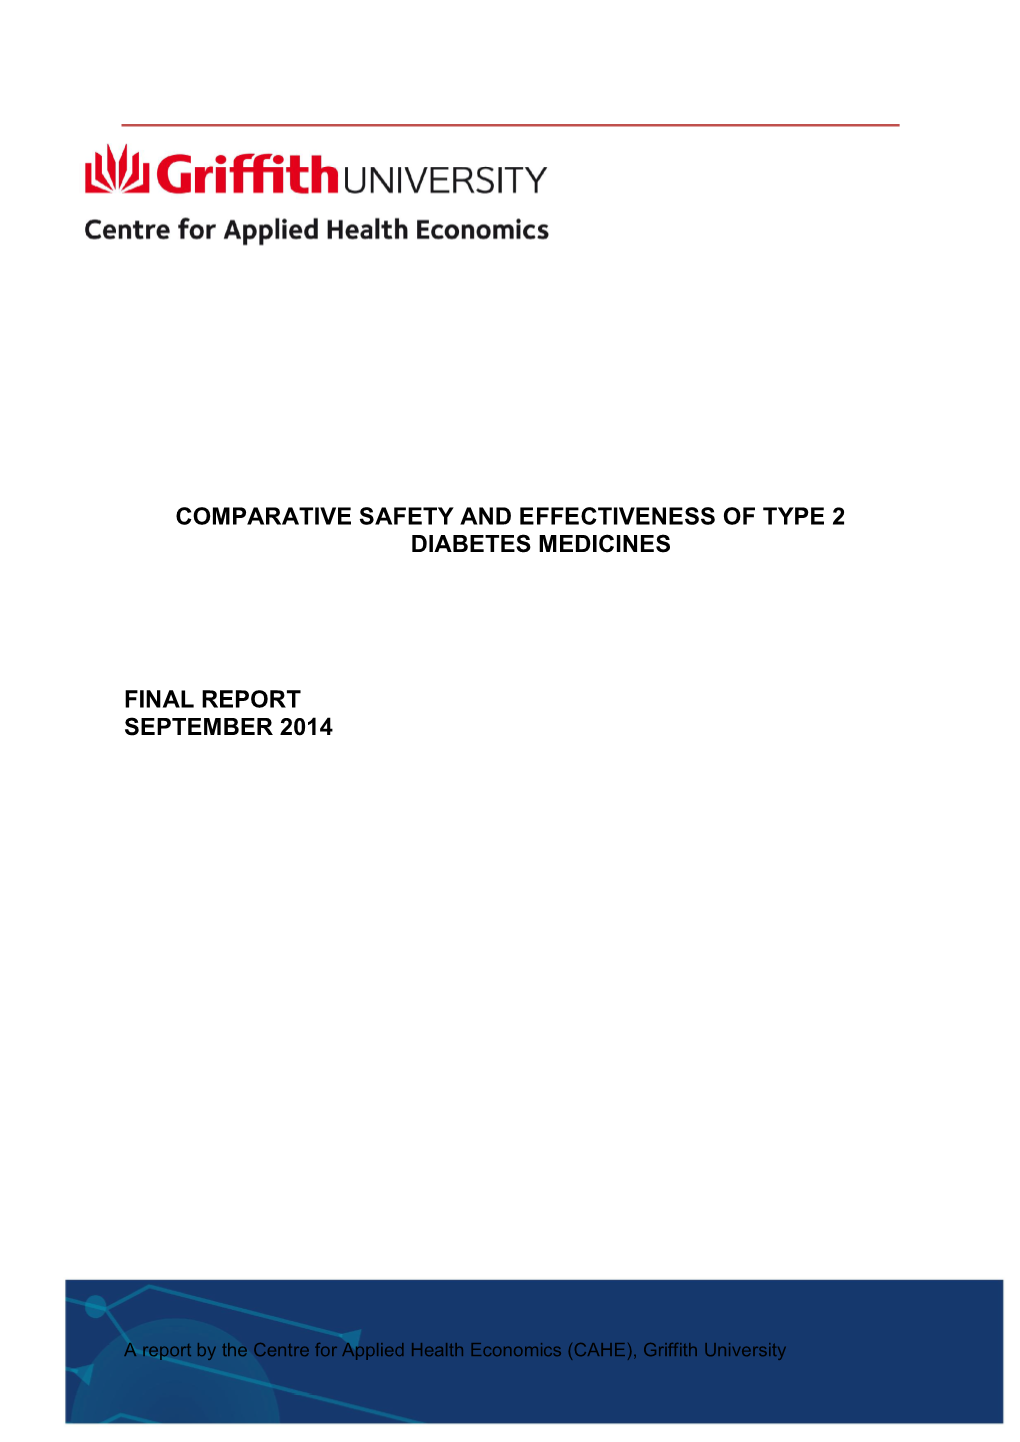 Comparative Safety and Effectiveness of Type 2 Diabetes Medicines Final Report September 2014